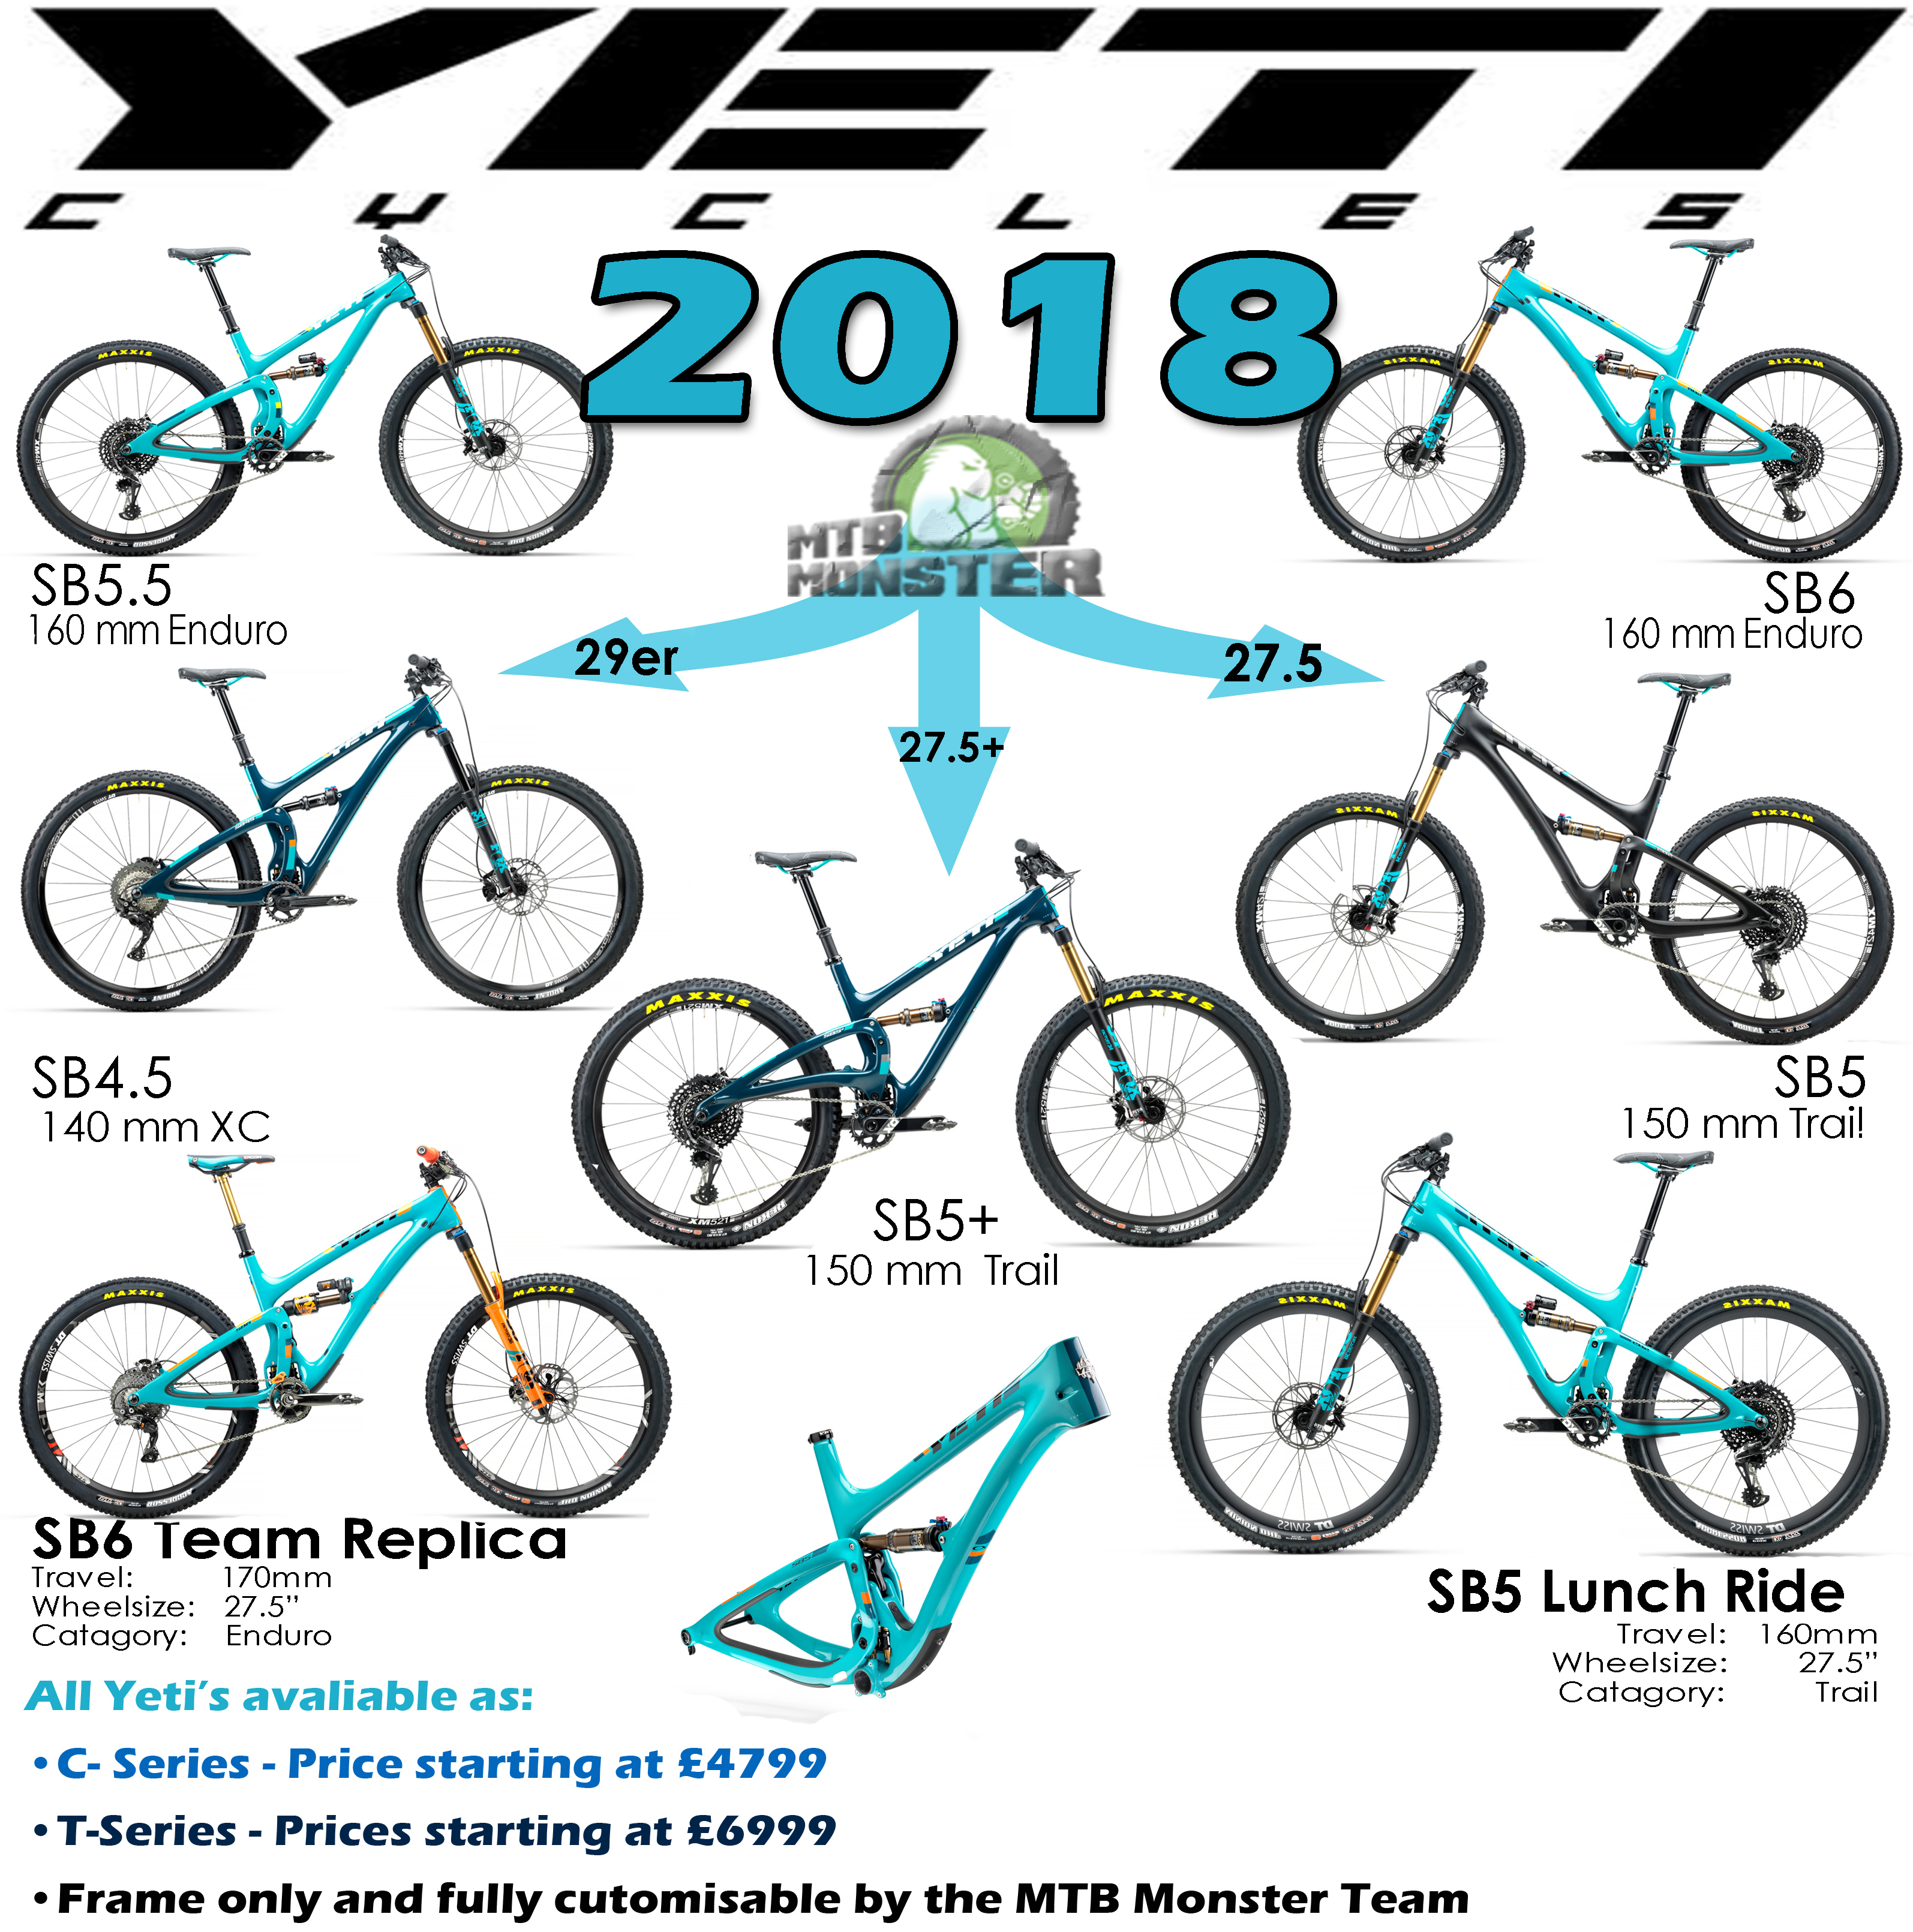 2018-yeti-cycles-bikes-range-and-information-and-guide-uk-dealer-mtb-monster-6-.jpg